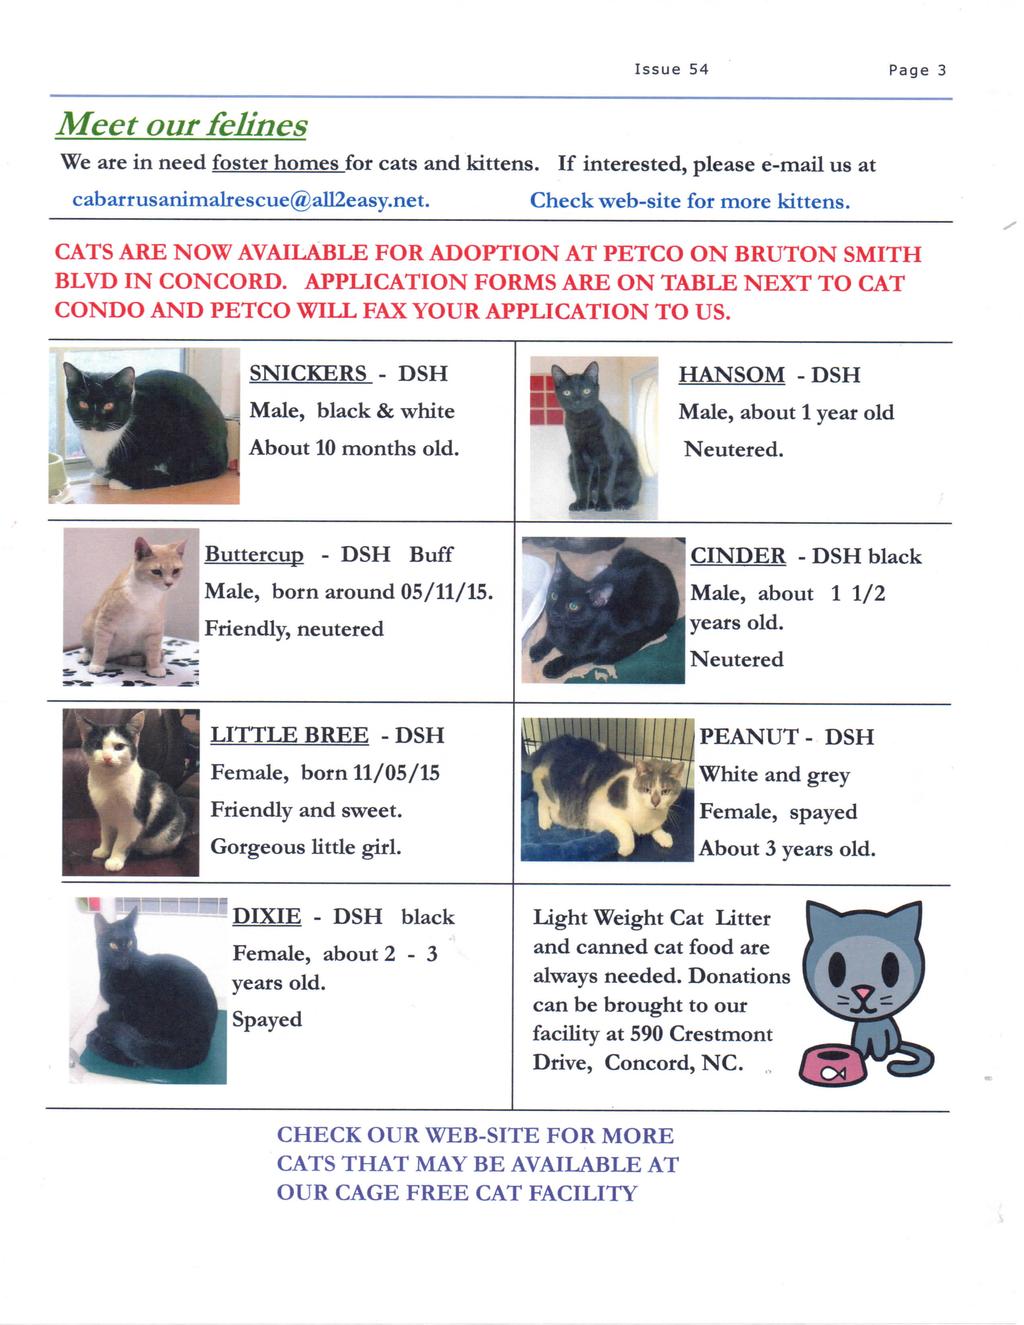 Meet our felines Issue 54 Page 3 We are in need foster homes for cats and kittens. If interested, please e-mail us at cabarrusanimalrescue@all2easy.net. Check web-site for more kittens.